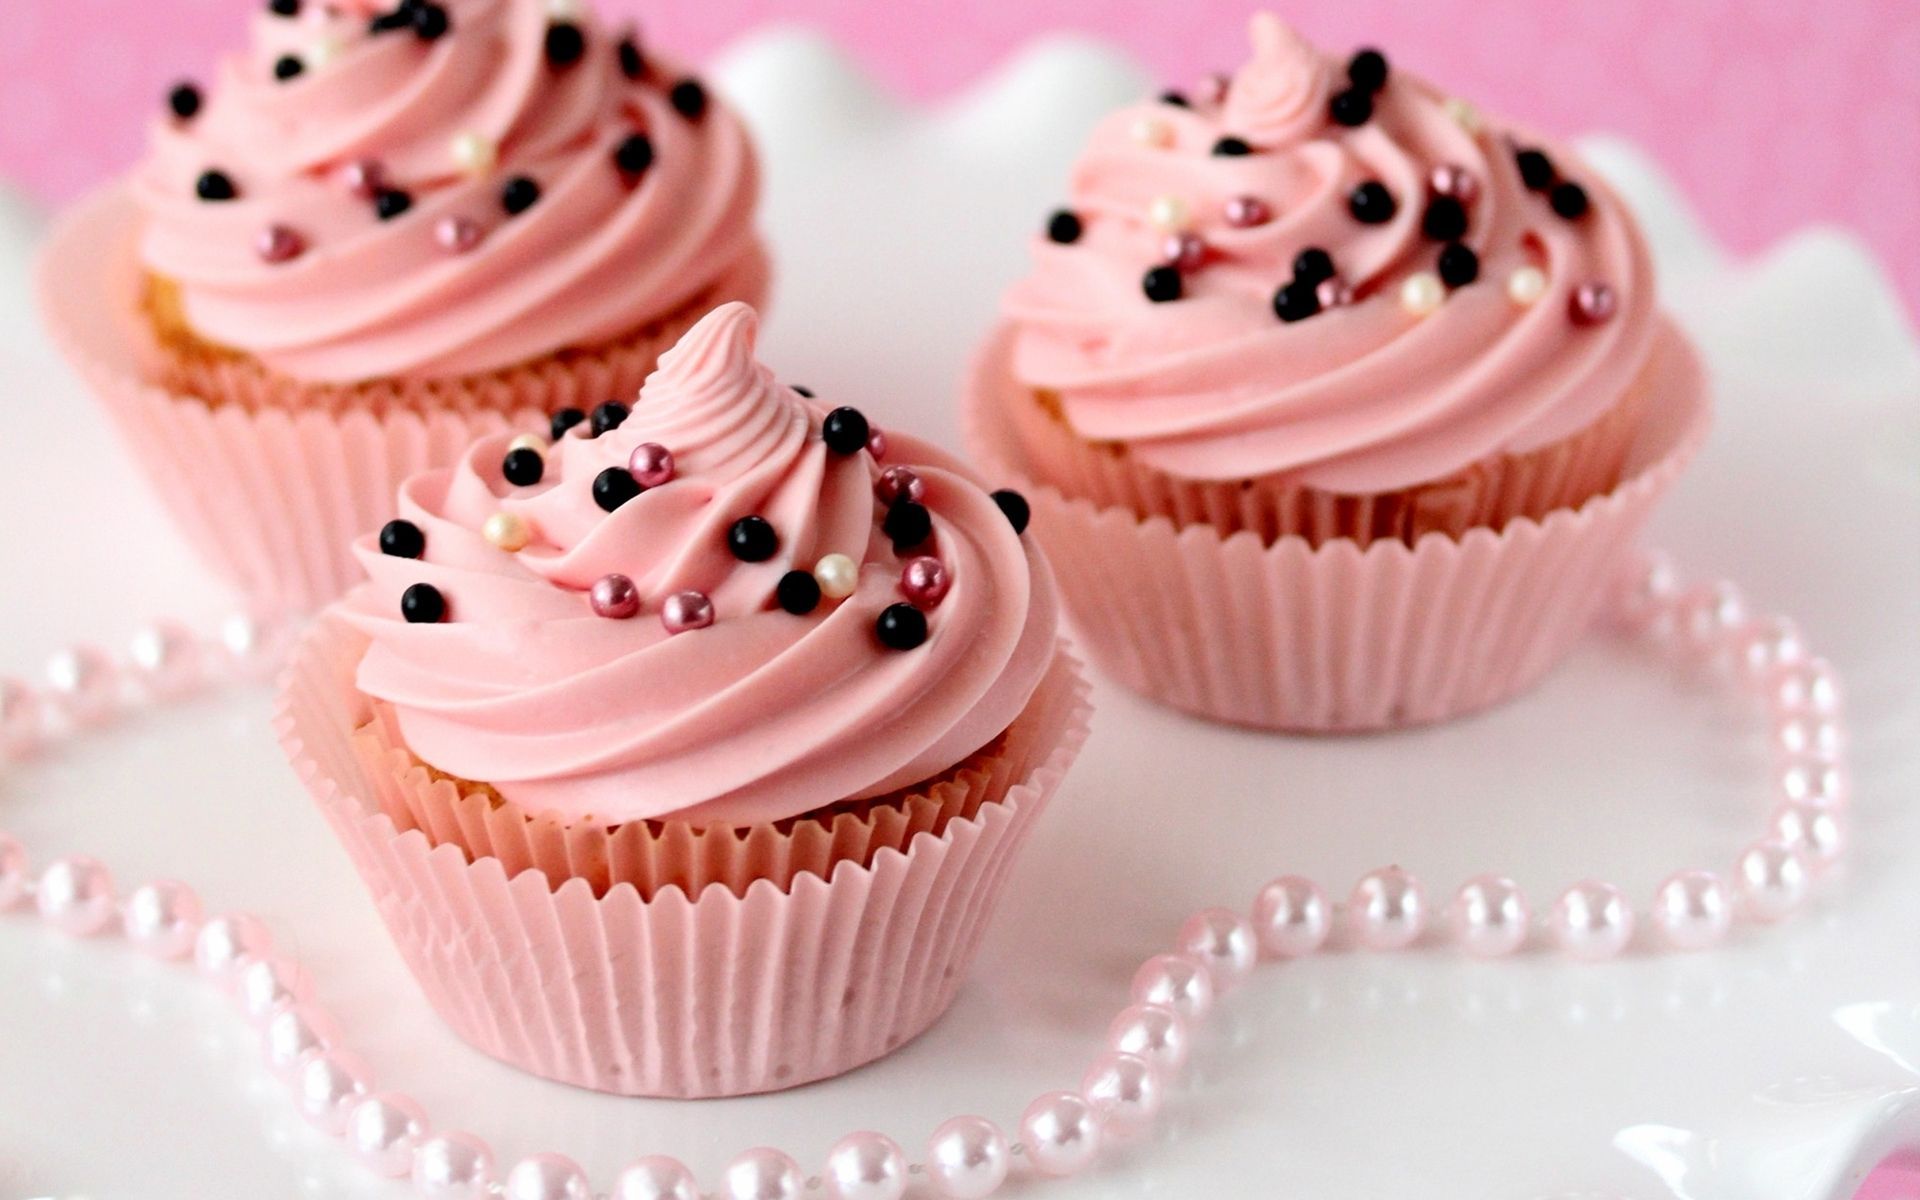 Cupcakes Wallpaper - Hd Image Of Cup Cakes - 1920x1200 Wallpaper 